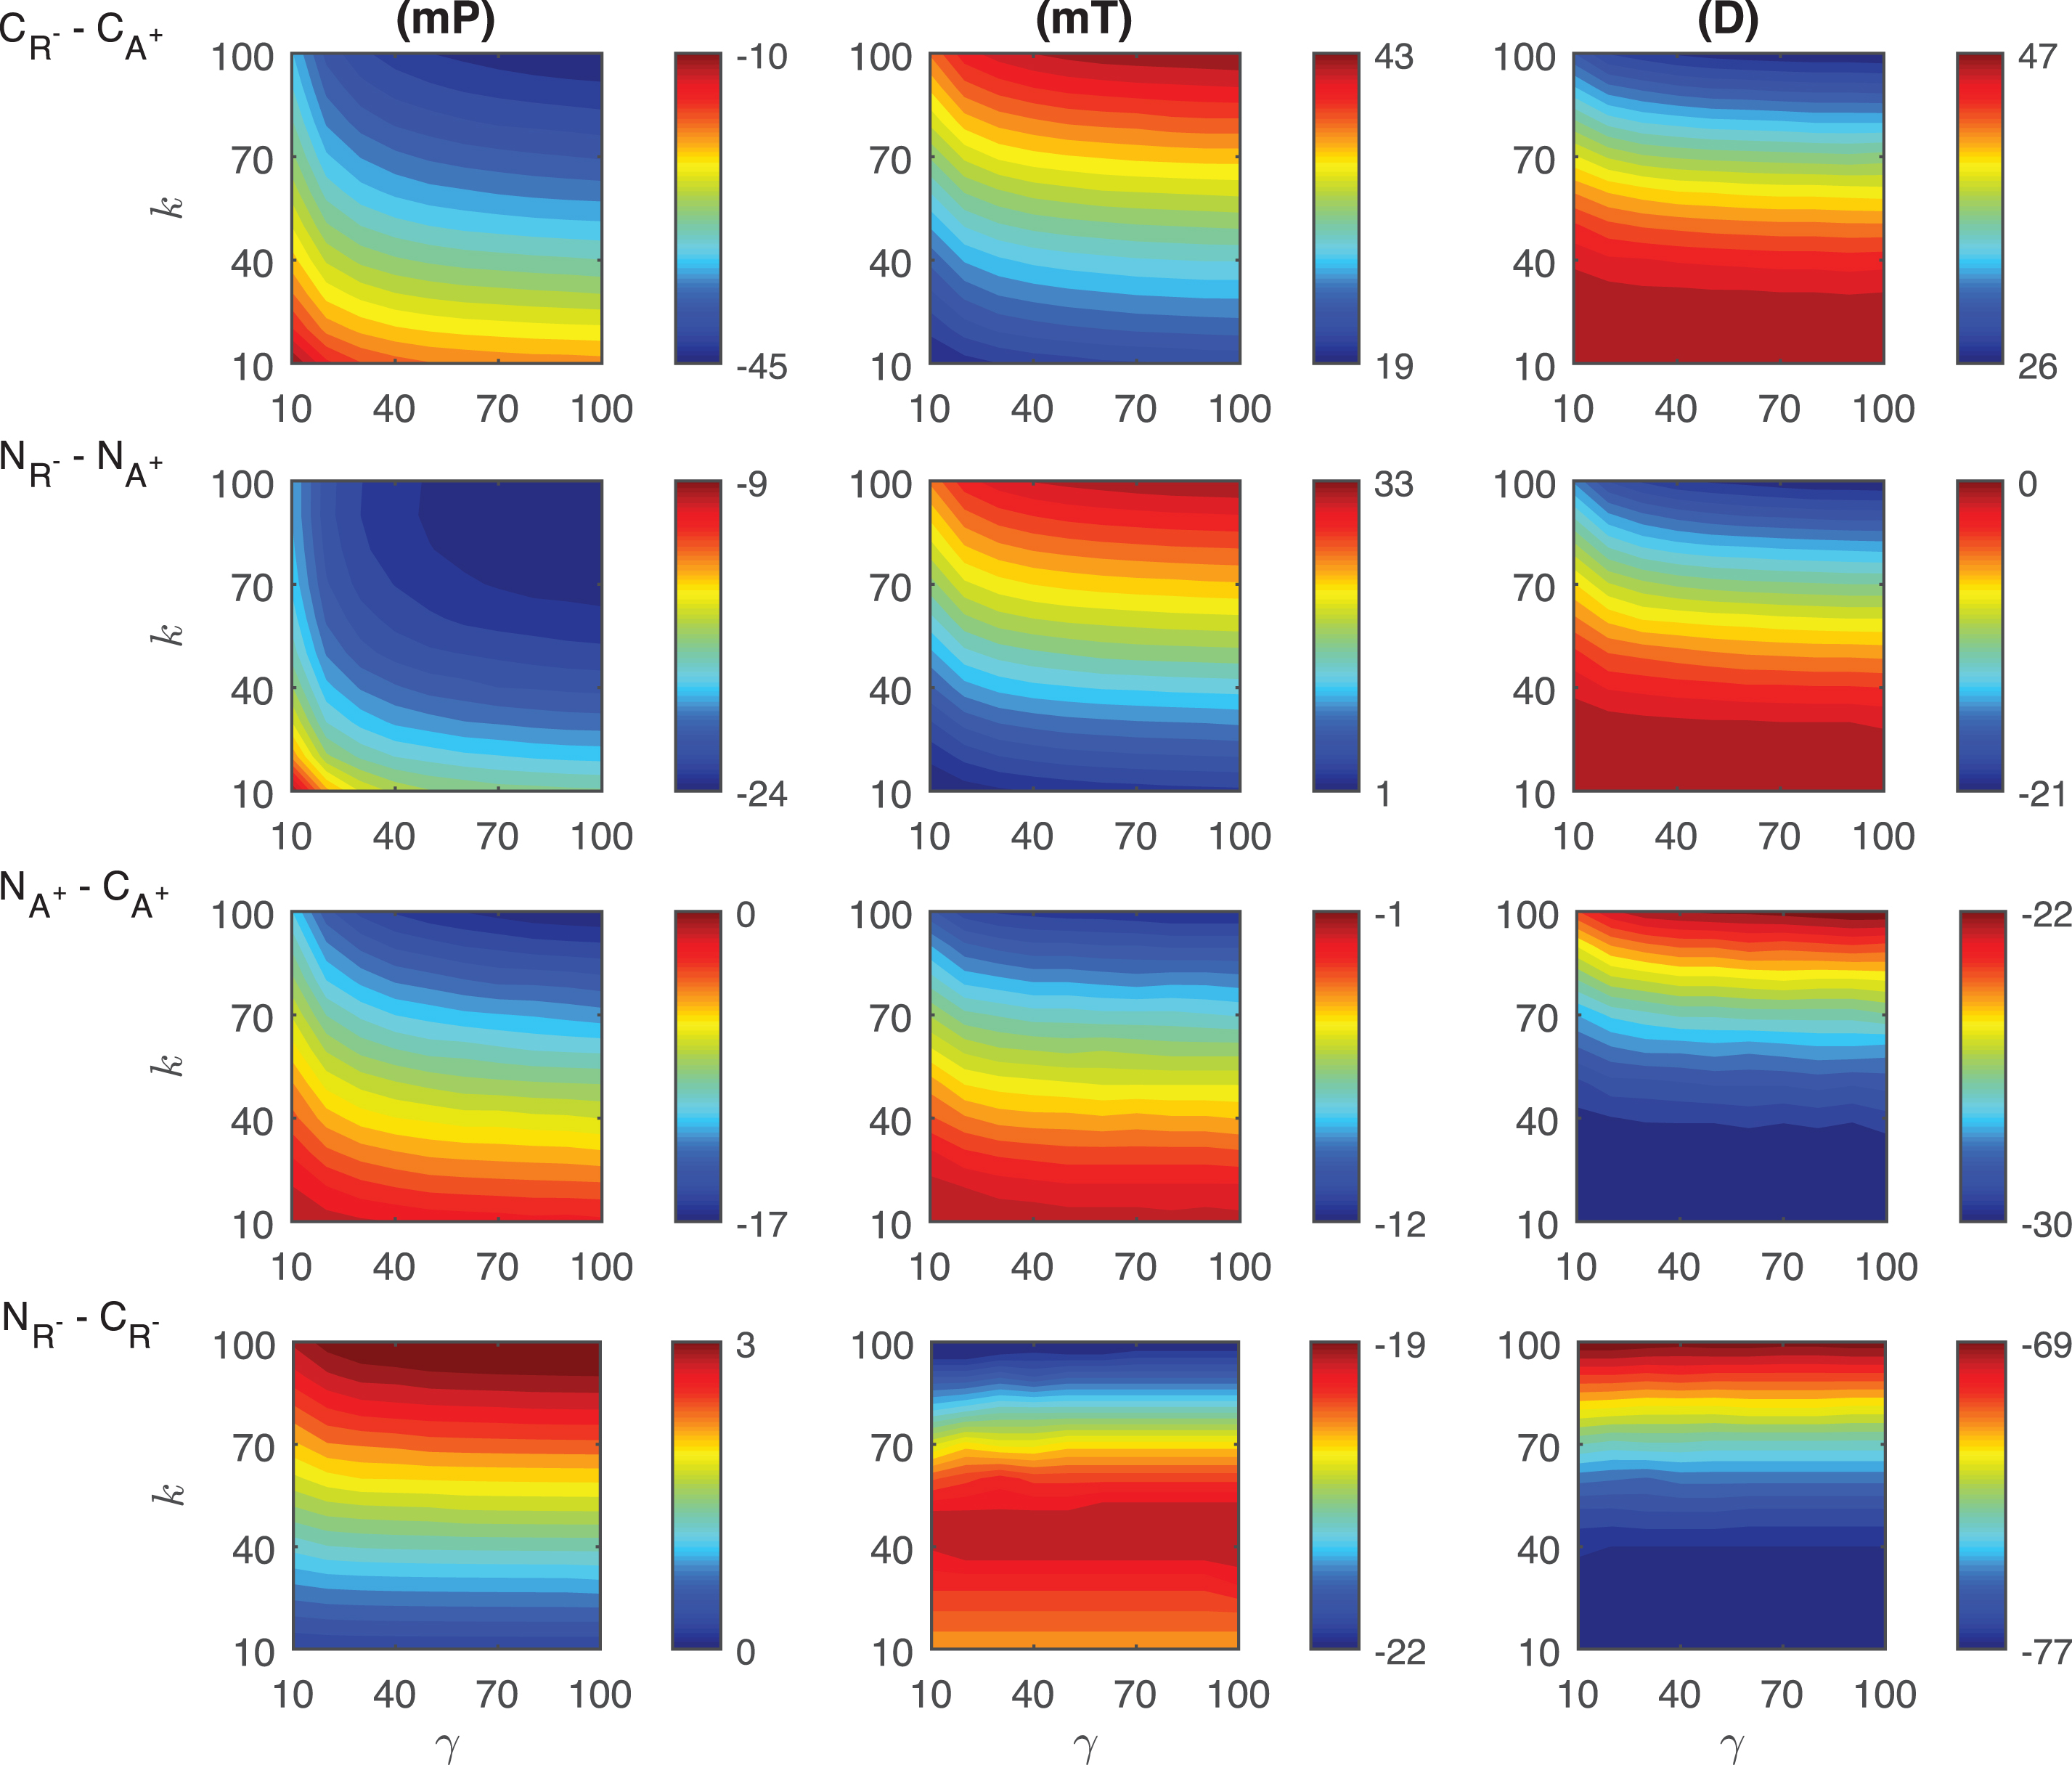 Heat maps for the comparison of the differences of three metrics (mid-protein level mP, time to reach mid-protein level mT and duration D) showing the dynamics of competitive (CA+, CR−) and noncompetitive (NA+, NR−) activation mechanisms. For all these simulations, the signal amplitude γ and persistency k are changed from 10-100 fold when ro = 10−4 while all the other parameters were kept constant at their estimated values listed in Section 3. For details see the text.